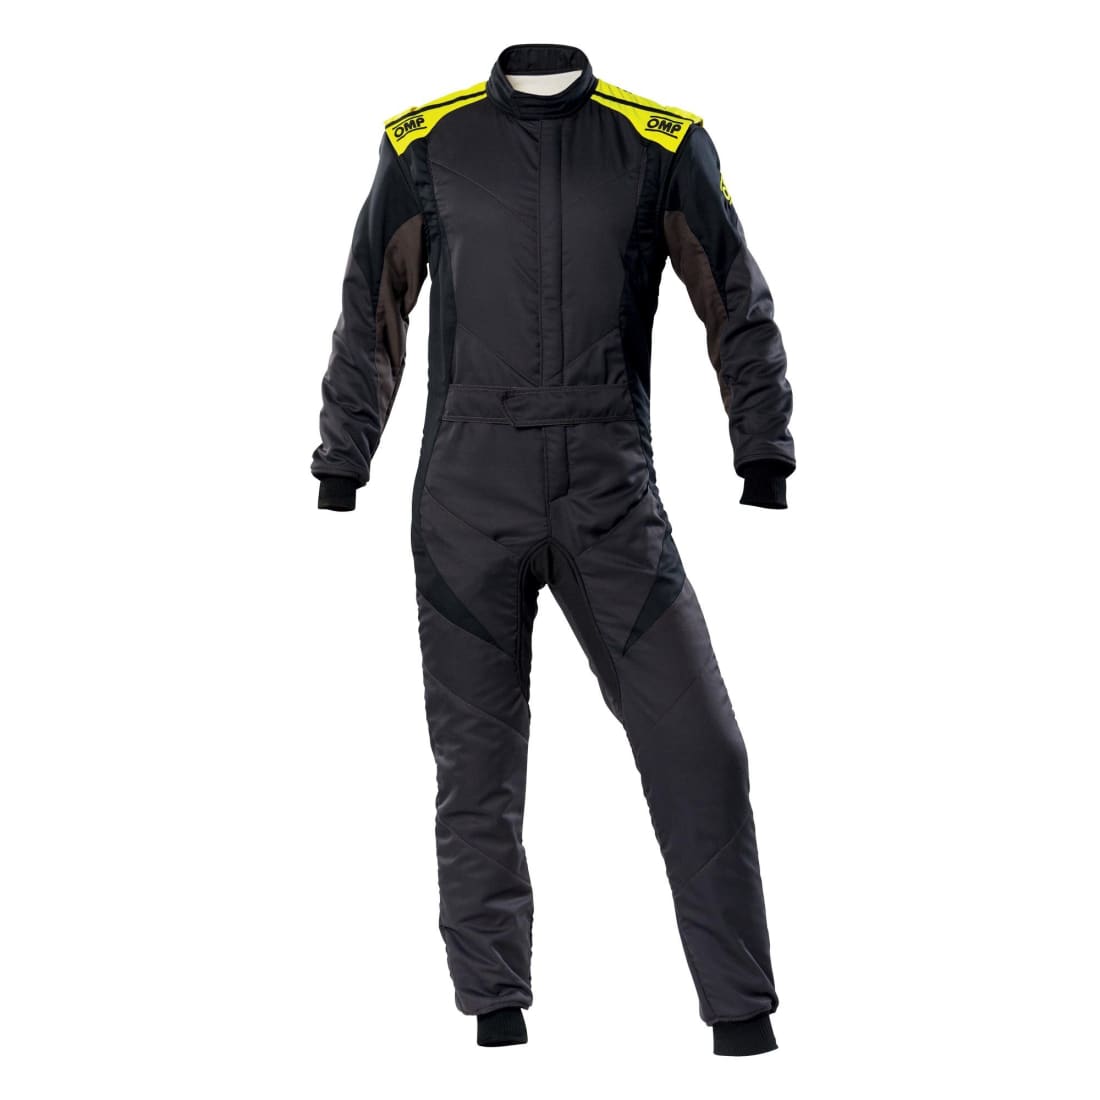 omp first evo racesuit